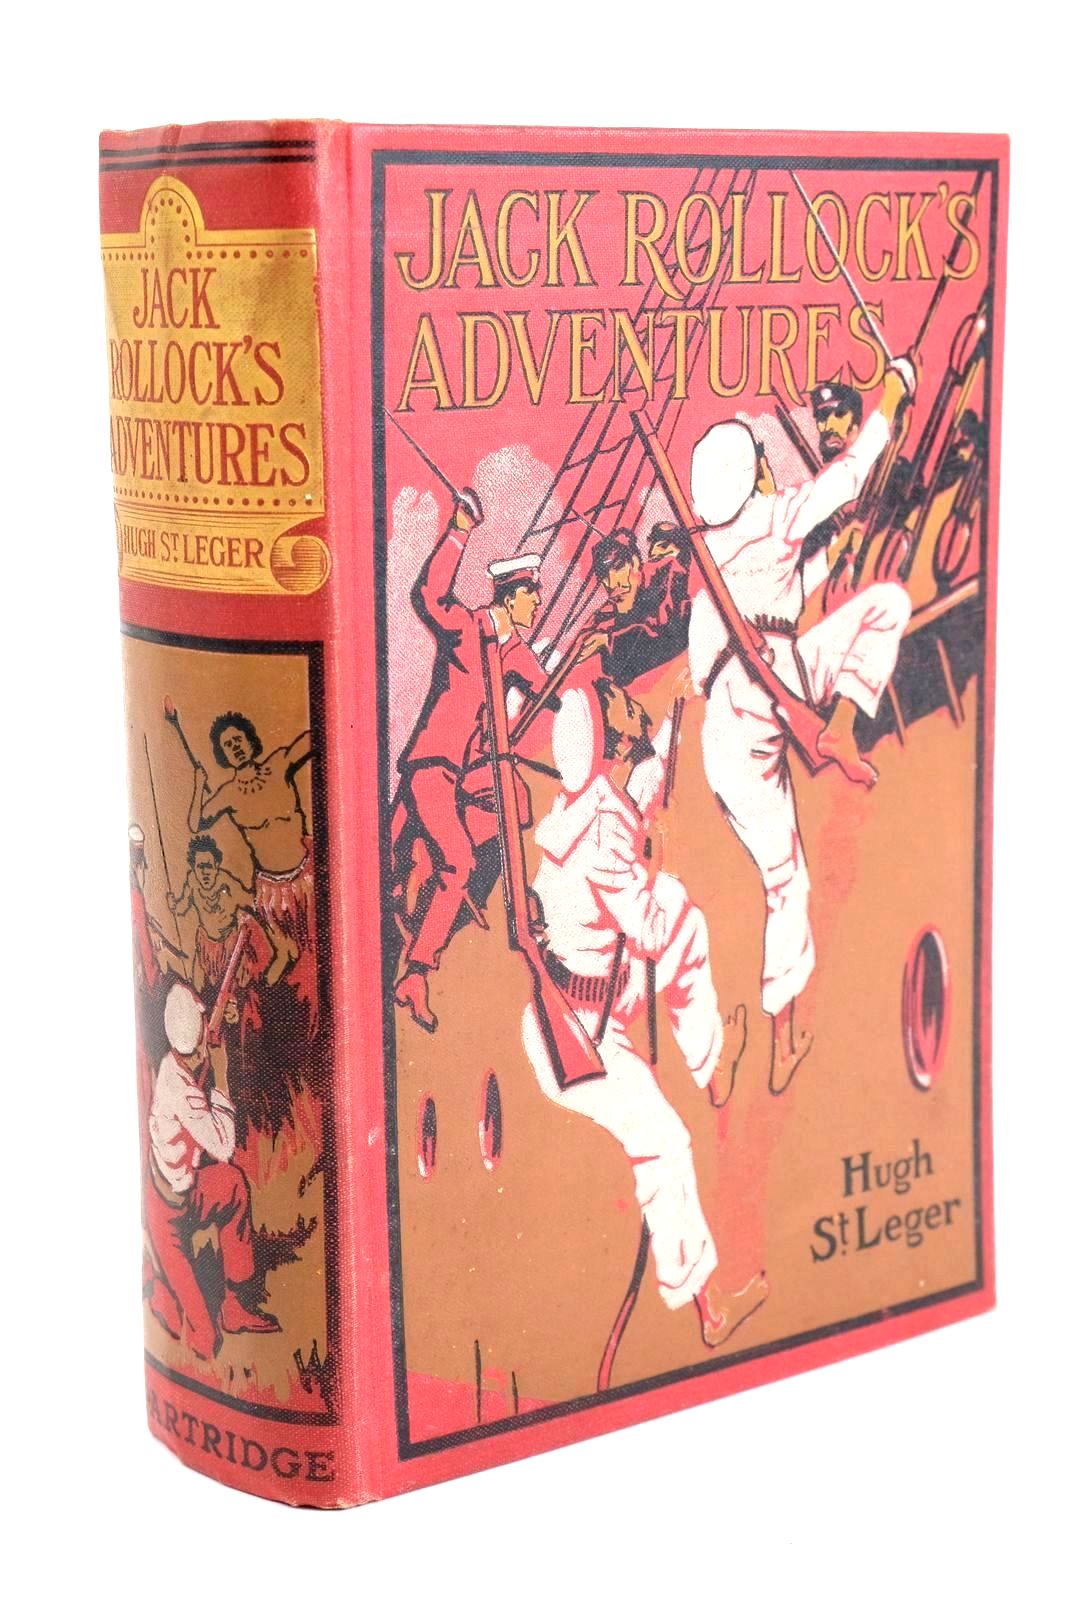 Photo of JACK ROLLOCK'S ADVENTURES OR SKELETON REEF written by St. Leger, Hugh illustrated by Prater, Ernest published by S.W. Partridge & Co. Ltd. (STOCK CODE: 1324488)  for sale by Stella & Rose's Books